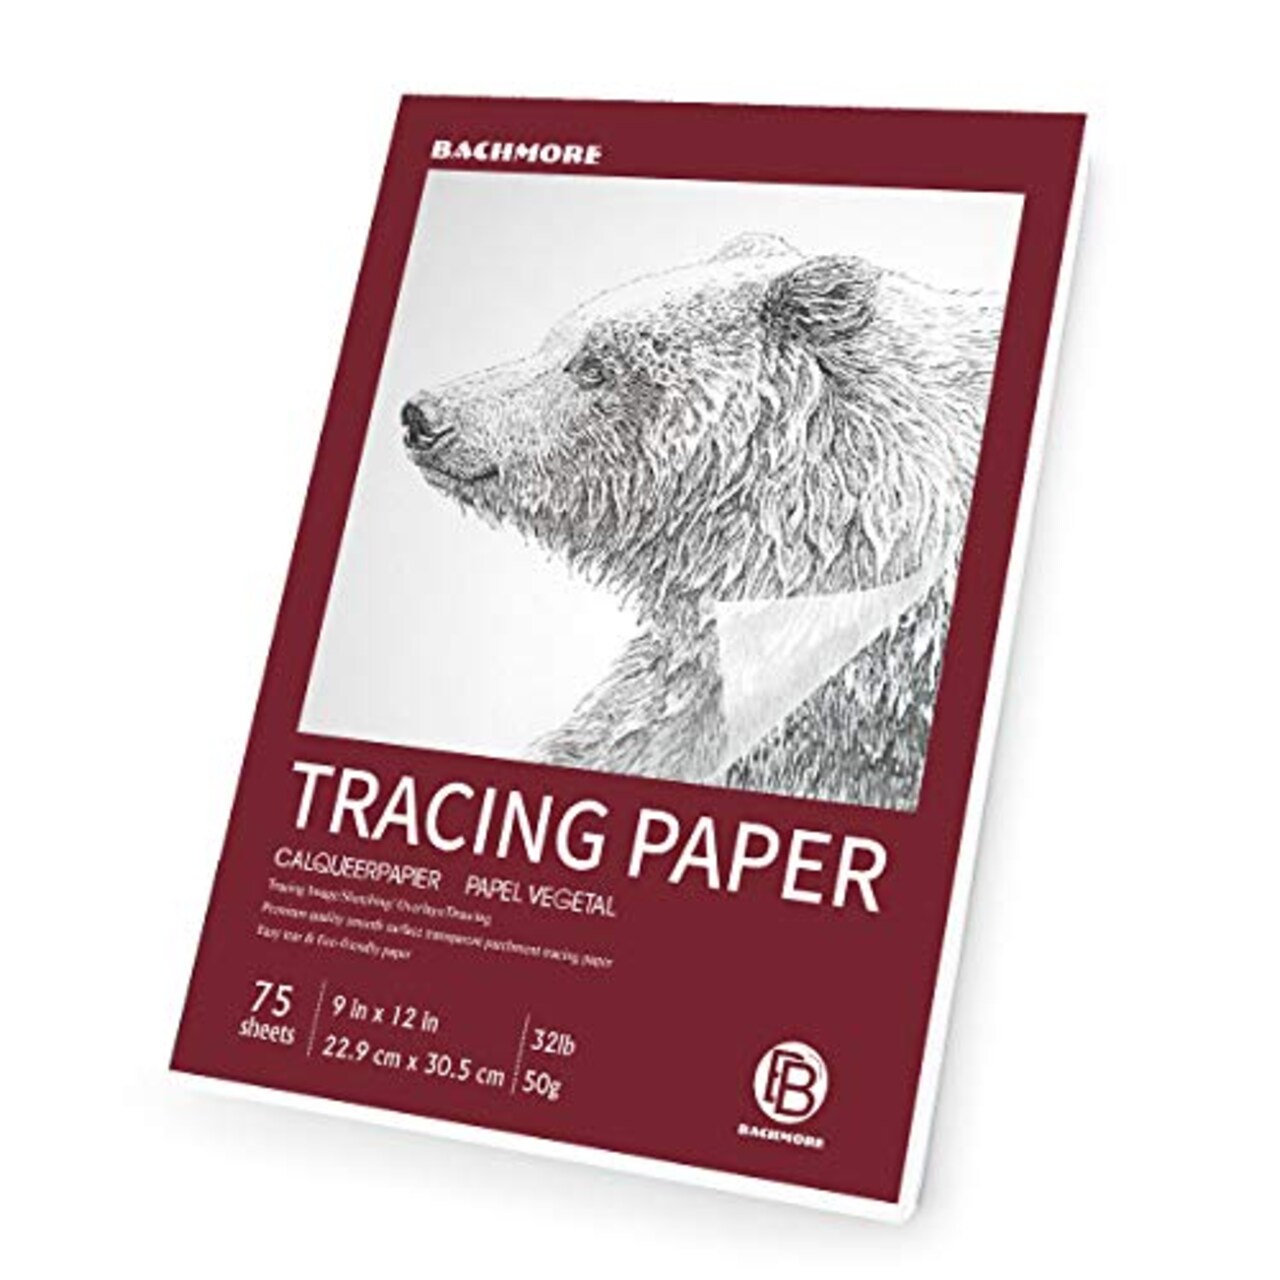 Bachmore 9”x12” Artist's Tracing Paper Pad, 75 Sheets – Translucent Tracing  Paper for Pencil, Marker and Ink - Trace Images, Sketch, Preliminary  Drawing, Overlays 32 LB / 50 GSM